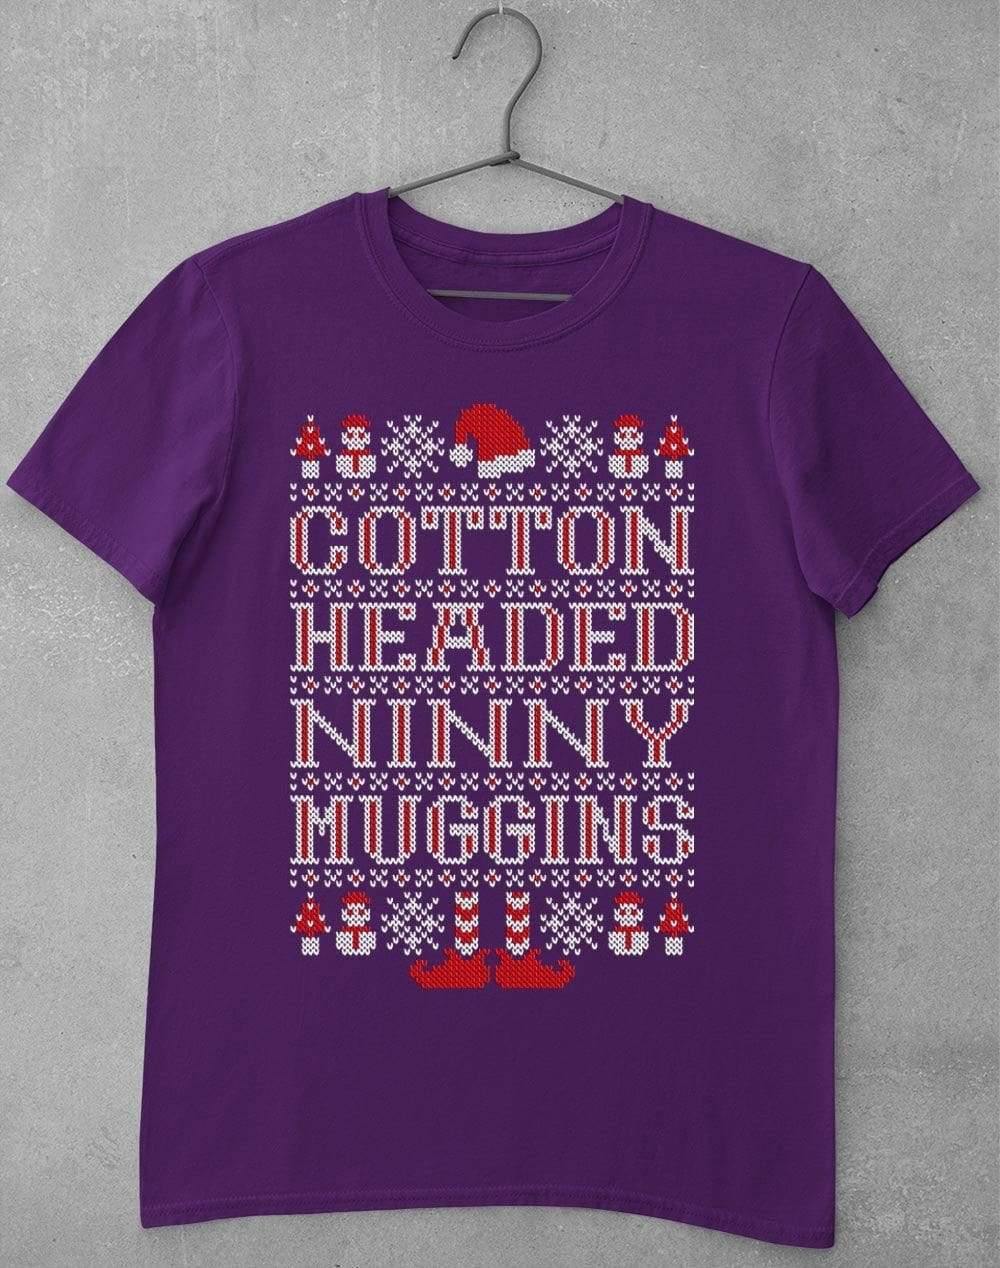 Cotton Headed Ninny Muggins Festive Knitted-Look T-Shirt S / Purple  - Off World Tees